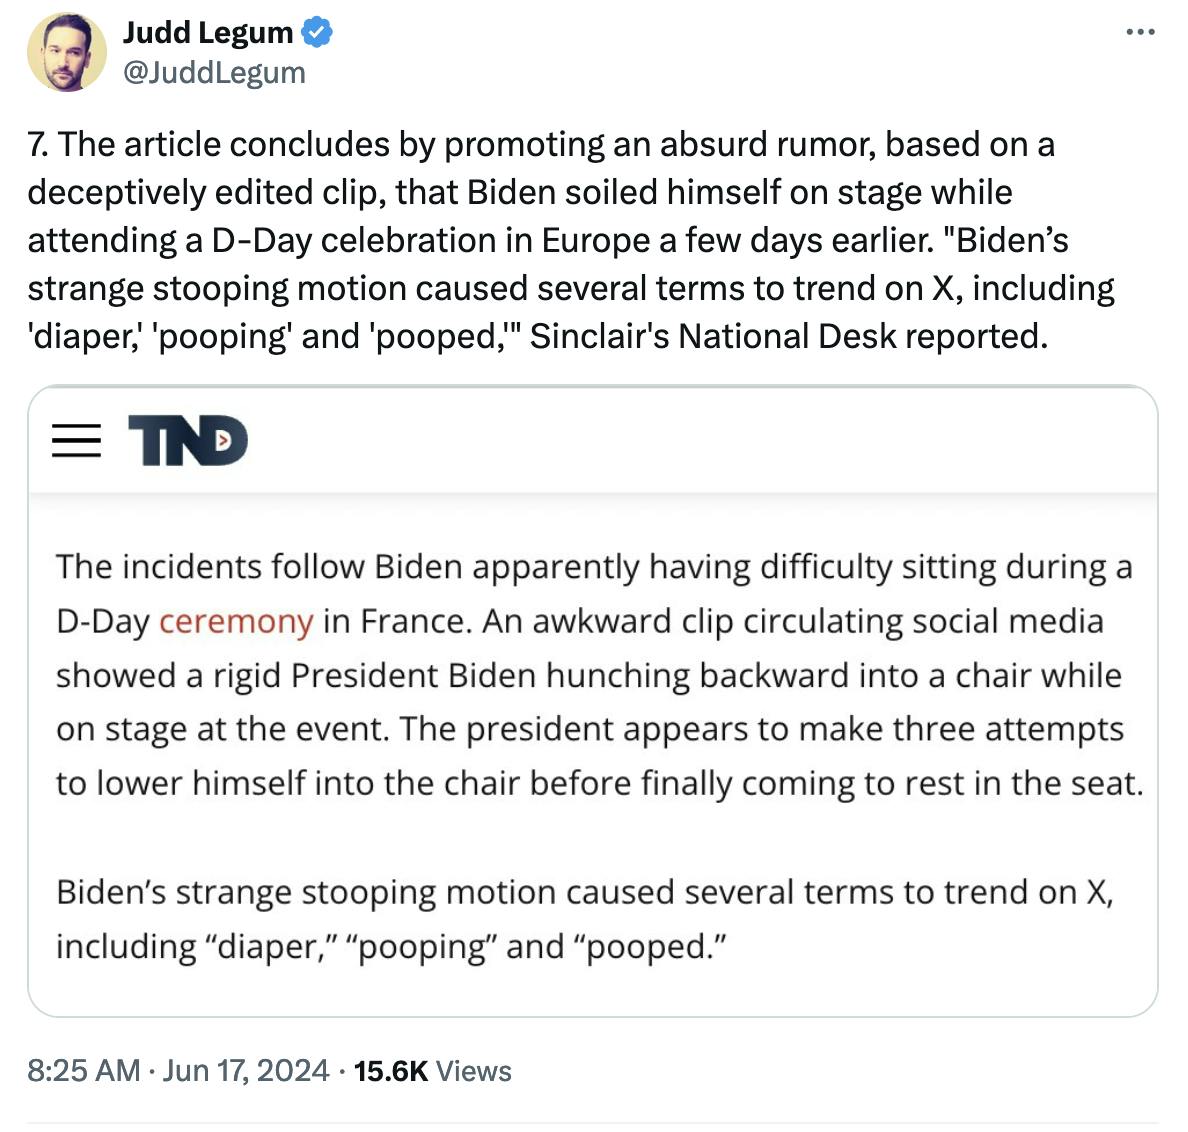 Tweet screenshot Judd Legum: 7. The article concludes by promoting an absurd rumor, based on a deceptively edited clip, that Biden soiled himself on stage while attending a D-Day celebration in Europe a few days earlier. "Biden’s strange stooping motion caused several terms to trend on X, including 'diaper,' 'pooping' and 'pooped,'" Sinclair's National Desk reported.